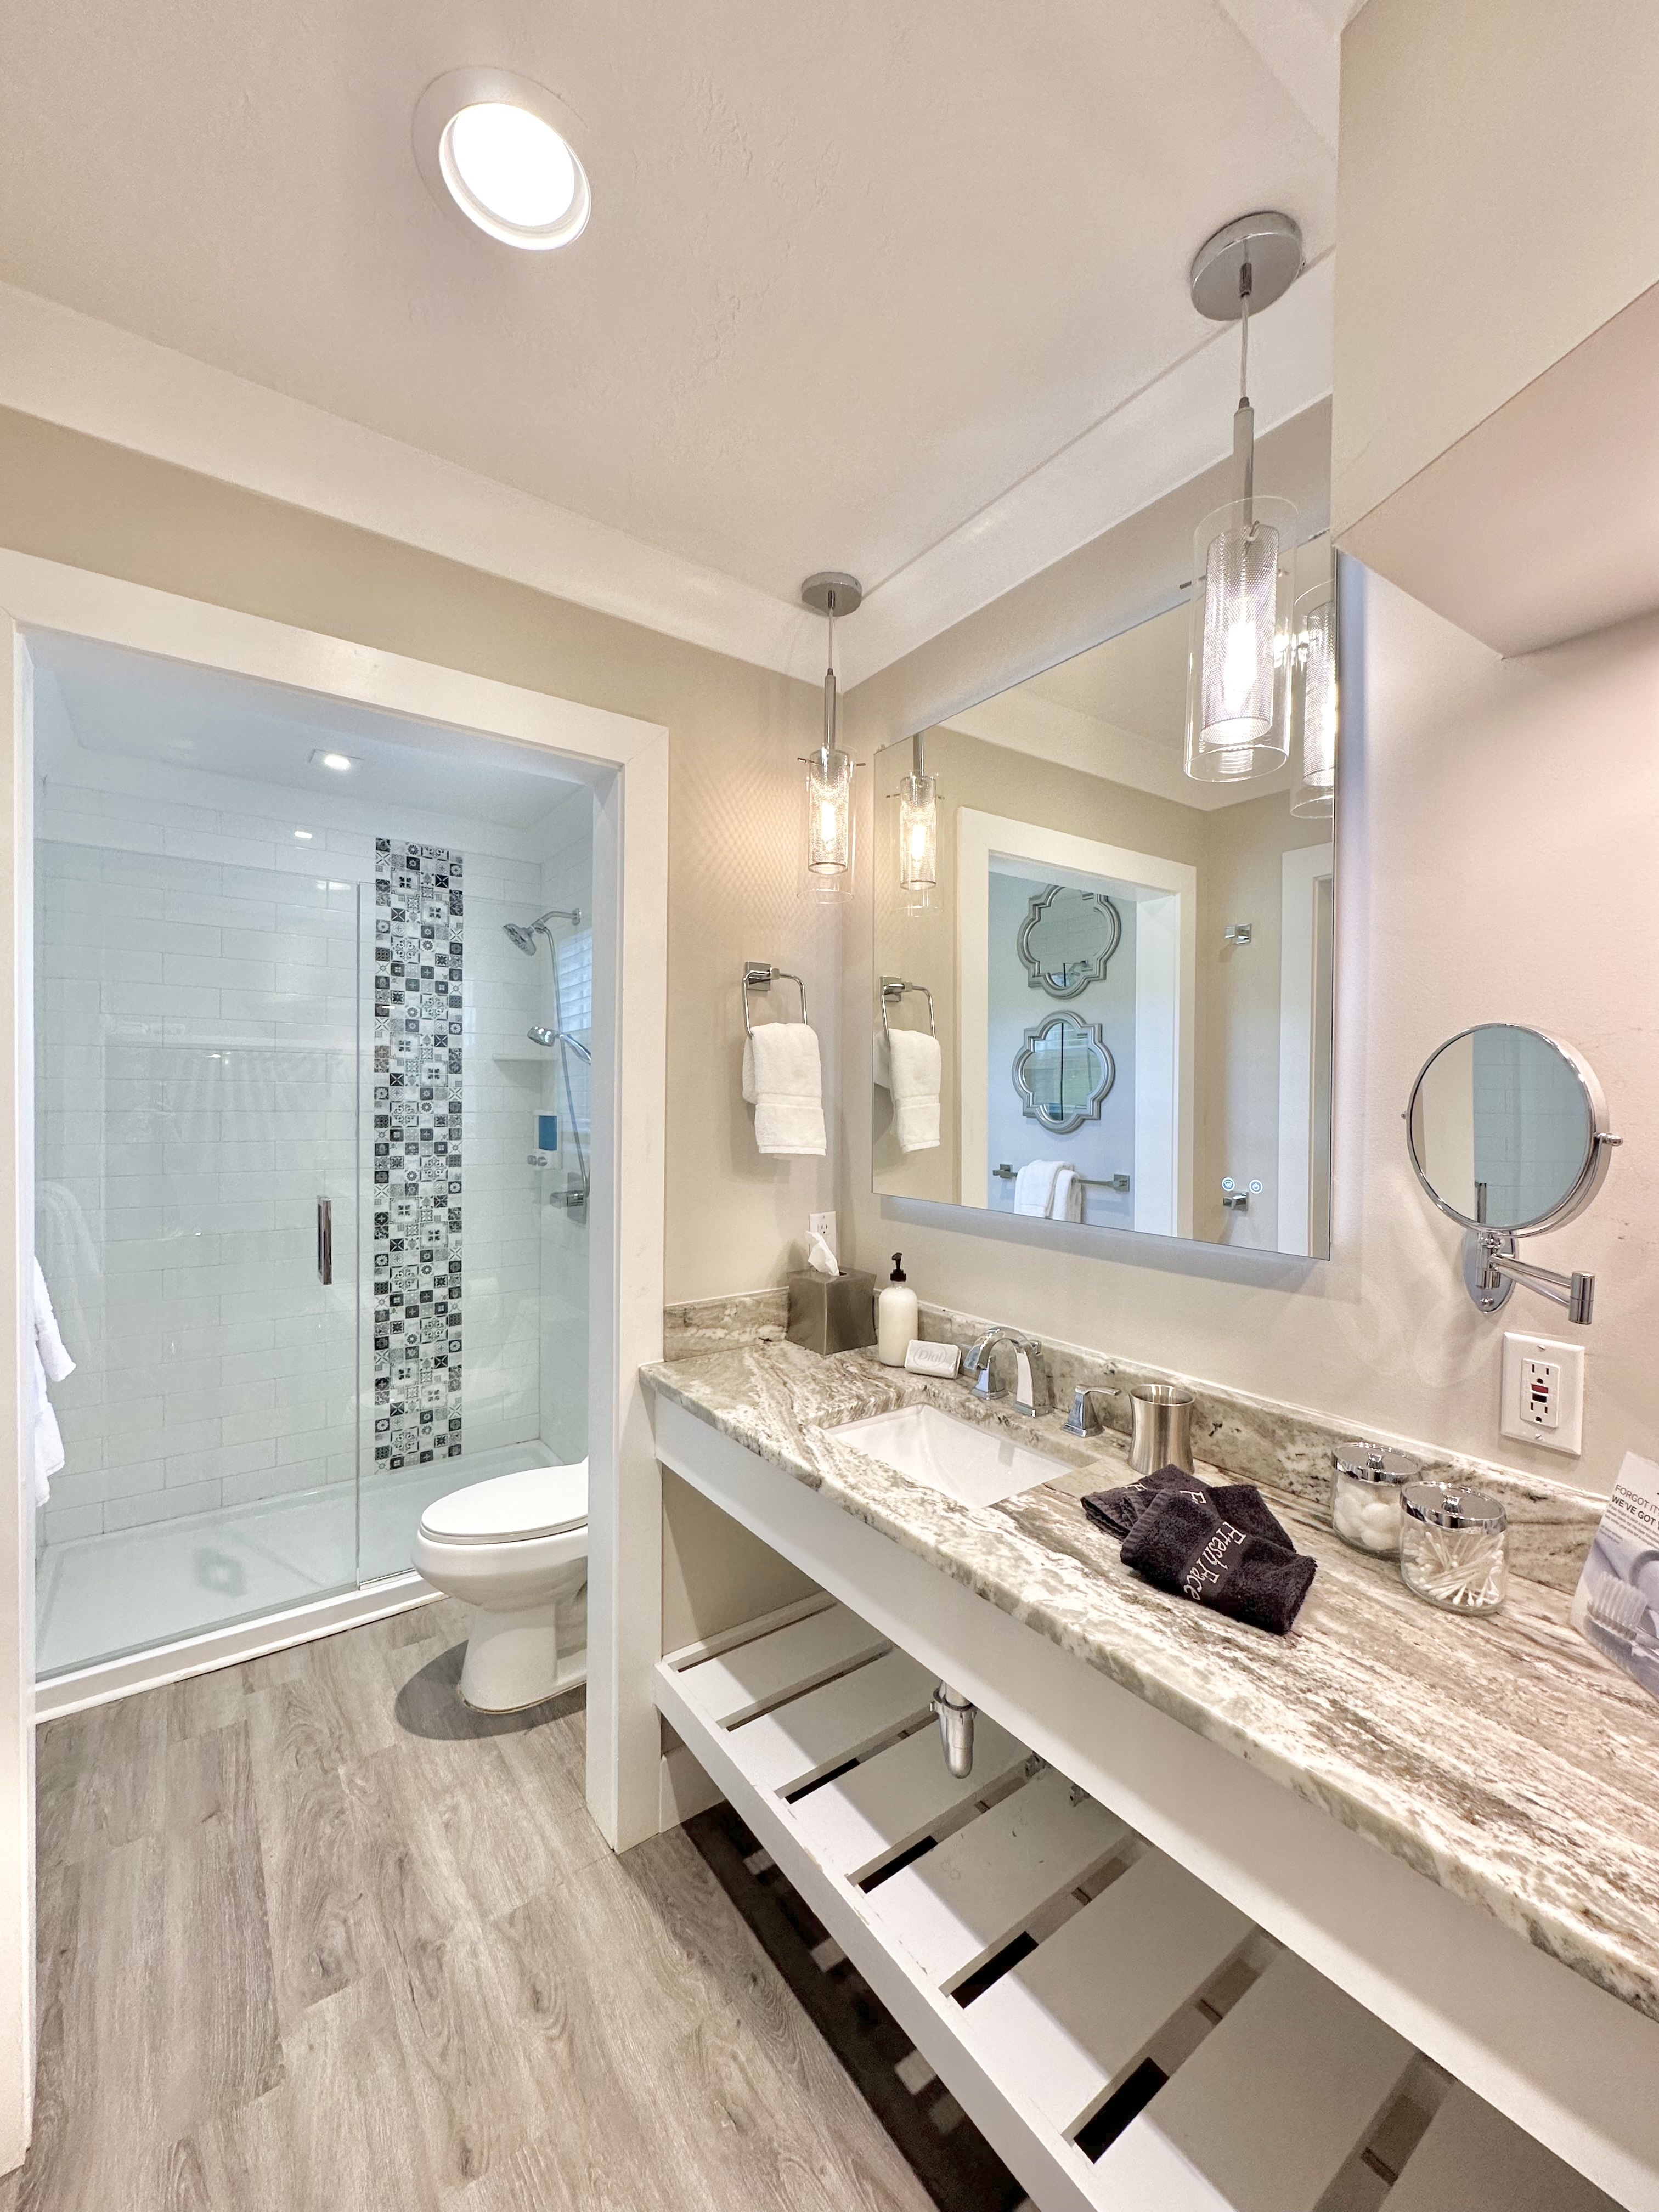 Rose Master enSuite Bathroom - Main Level. Hair dryers are also provided for every bathroom.